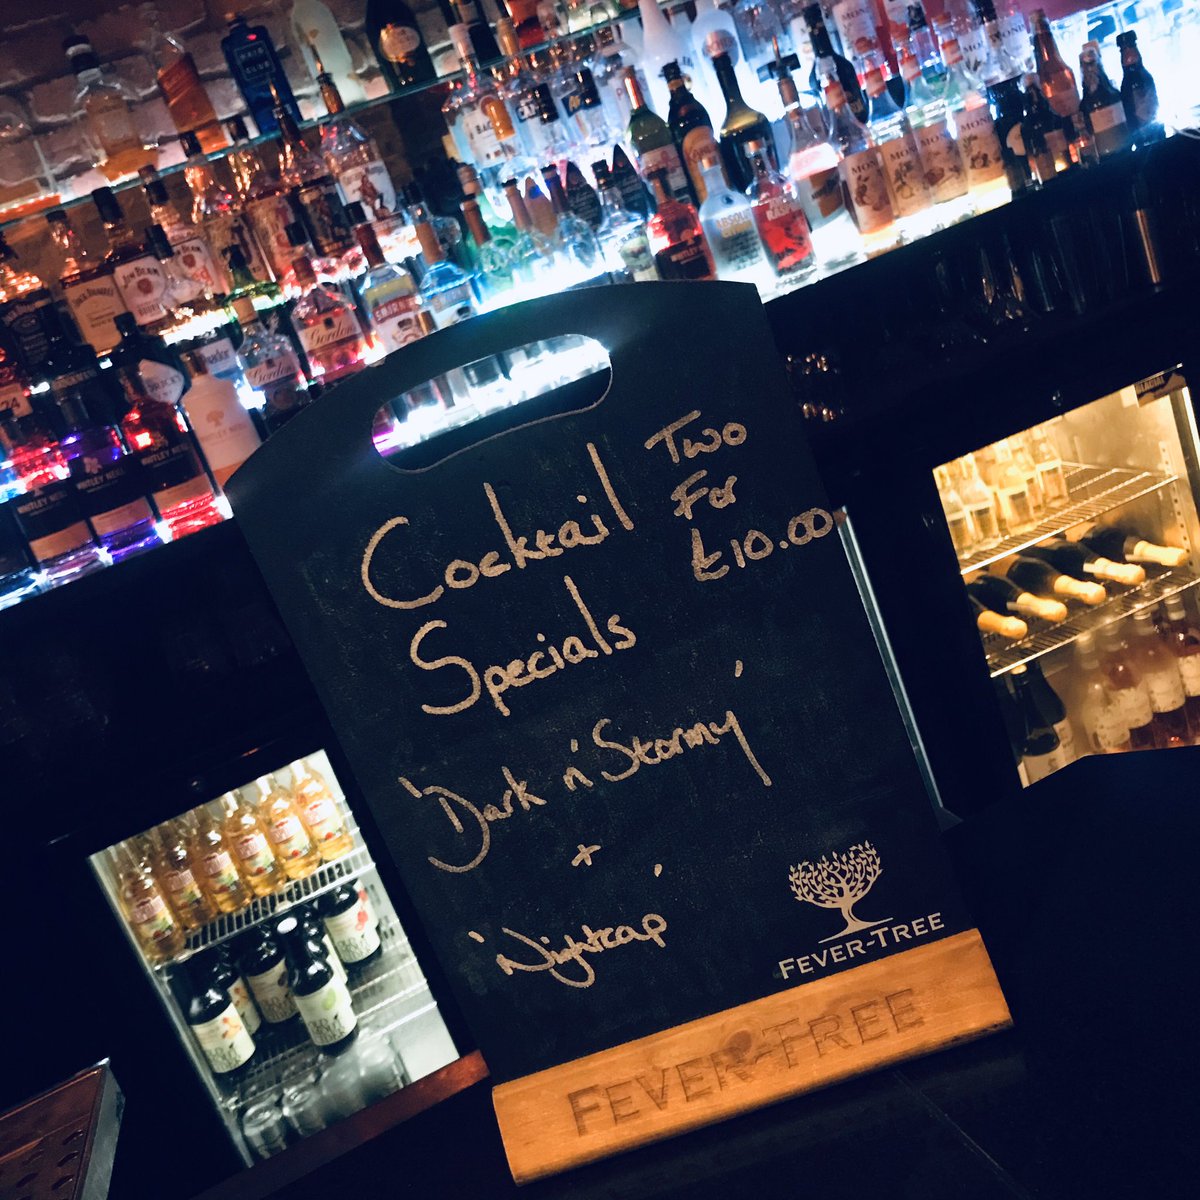 This weeks Cocktail spotlight is on ‘Dark & Stormy’ and ‘Night Cap’, to be added to our new Cocktail Menu coming soon 🙌🏼 

2 for £10 on these and all other cocktails 🍸 

#cocktails #cocktailoftheweek #managersspecial #supportlocal #barlife #barjustice #sunniside #sunderland